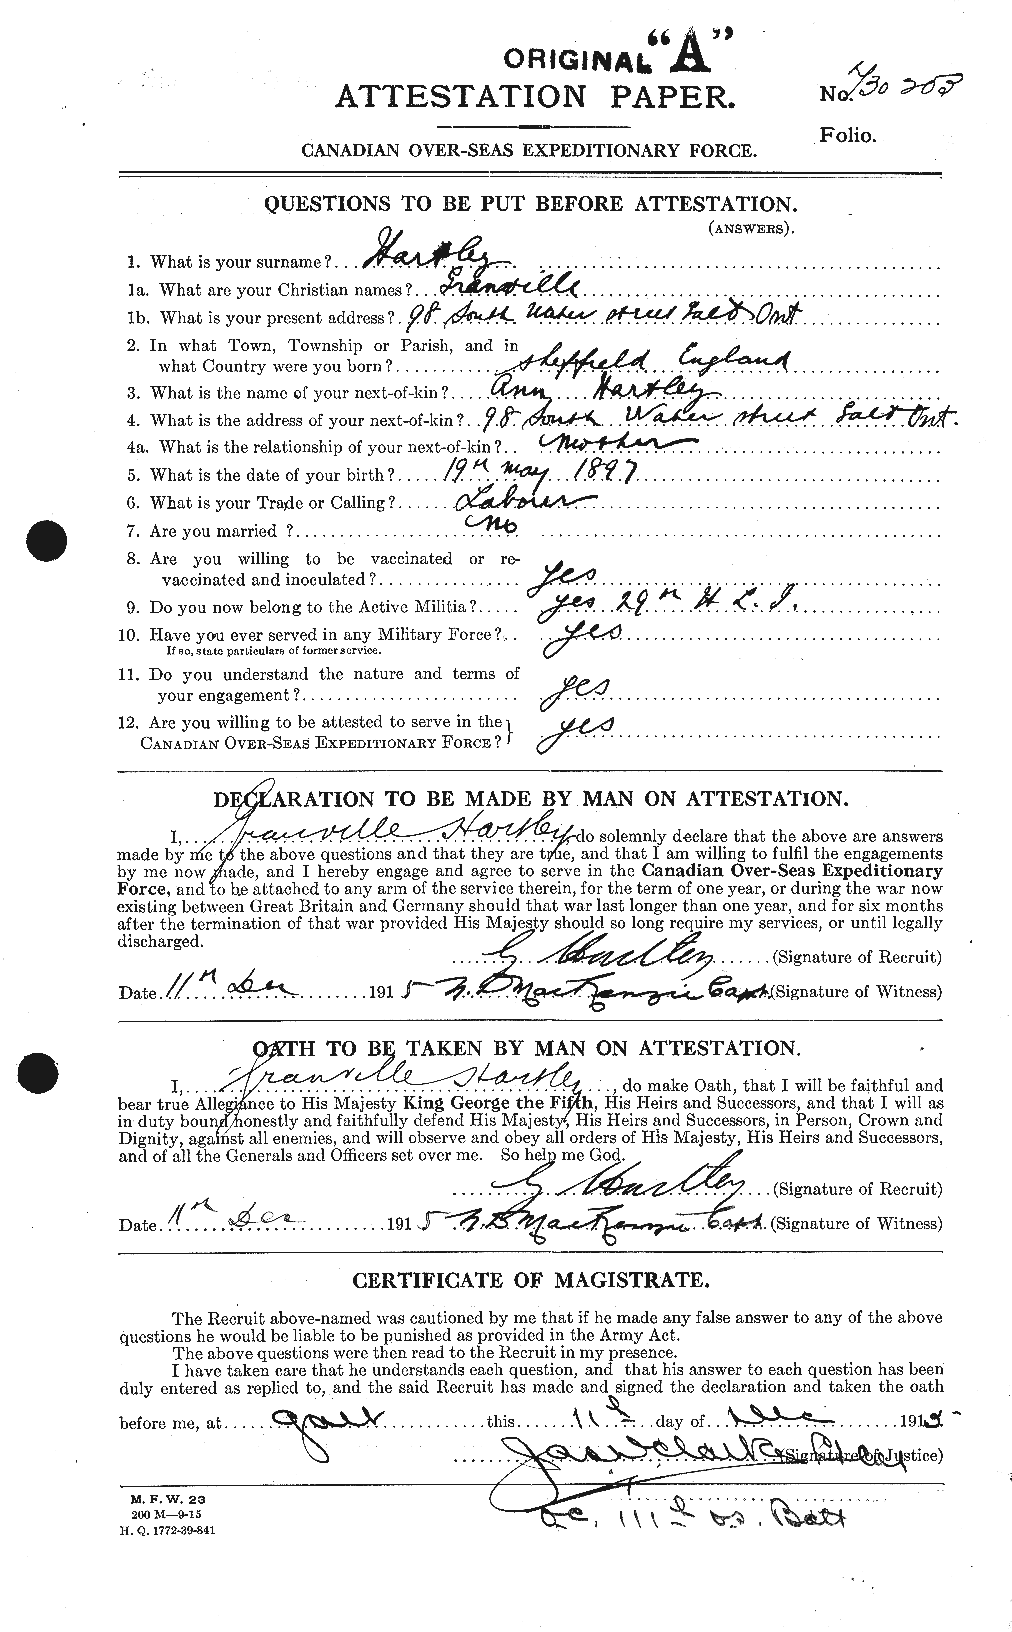 Personnel Records of the First World War - CEF 381519a